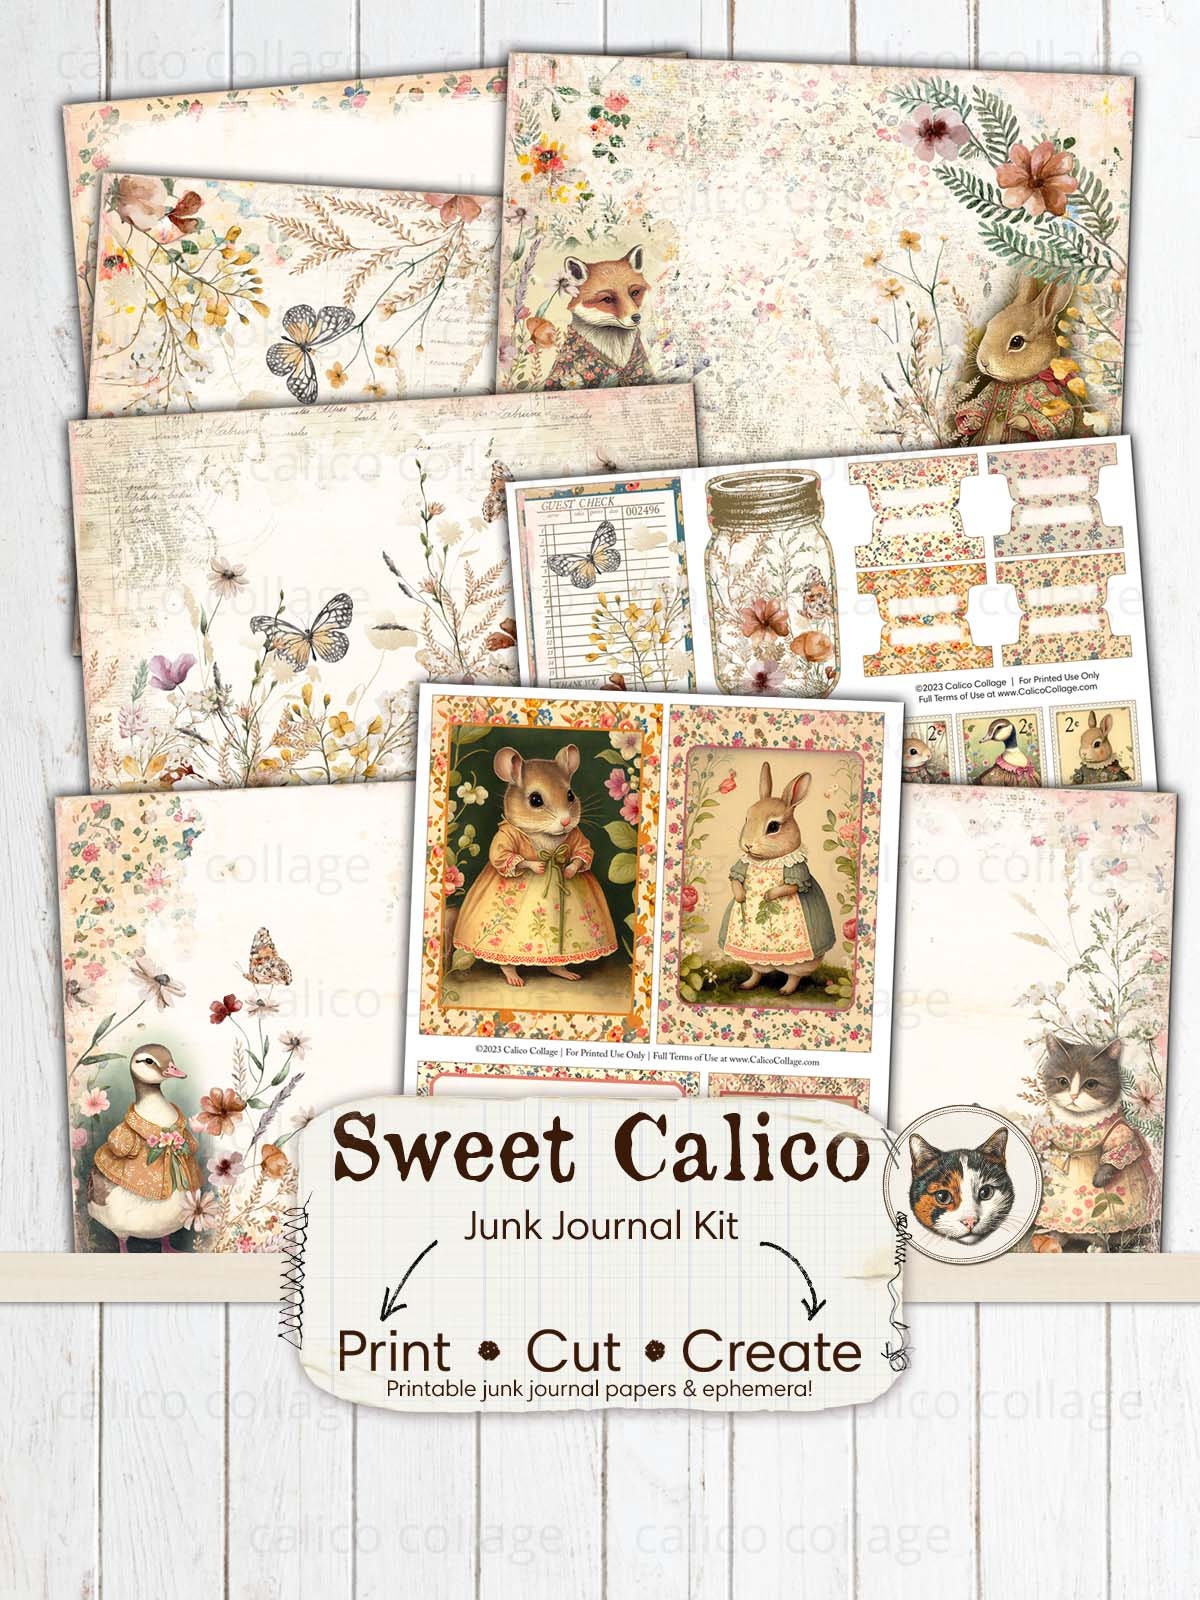 Shop all Junk Journal Printables – CalicoCollage